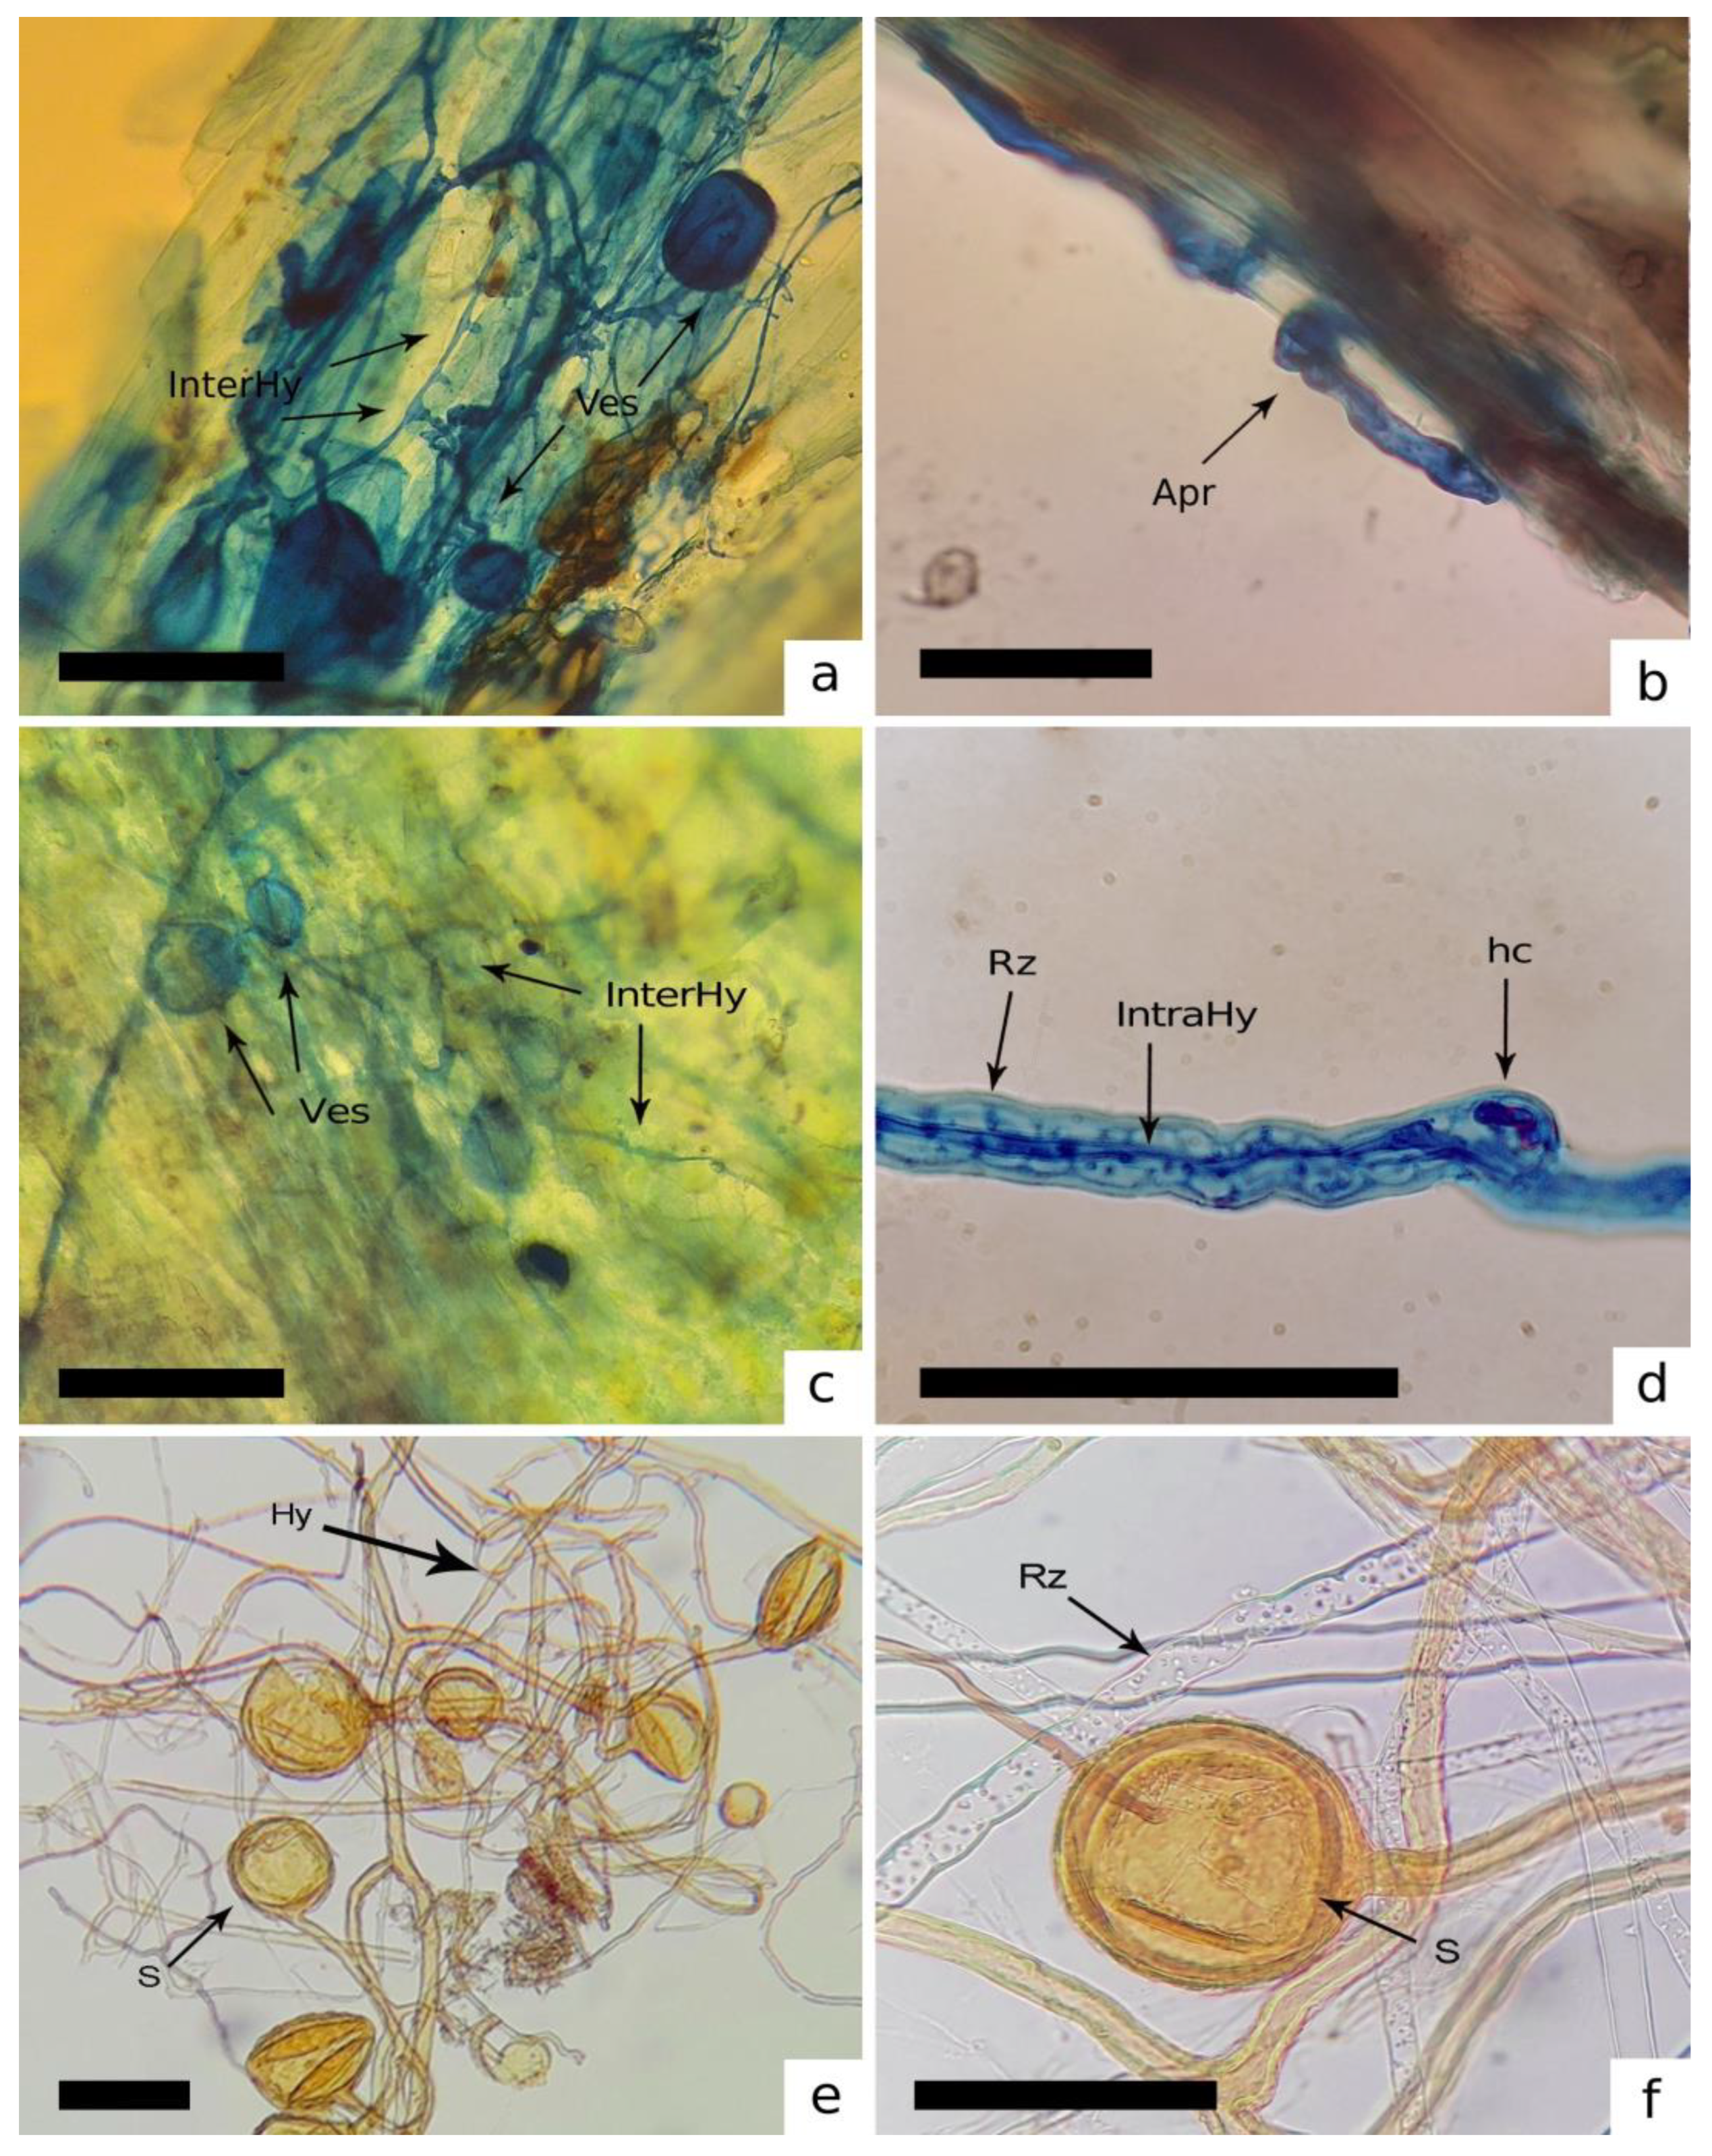 Inter- (InterHy) and intracellular (IntraHy) hyphae, vesicles (Ves), coils (hc) and spores (s) of AMF associated with mosses and liverworts.